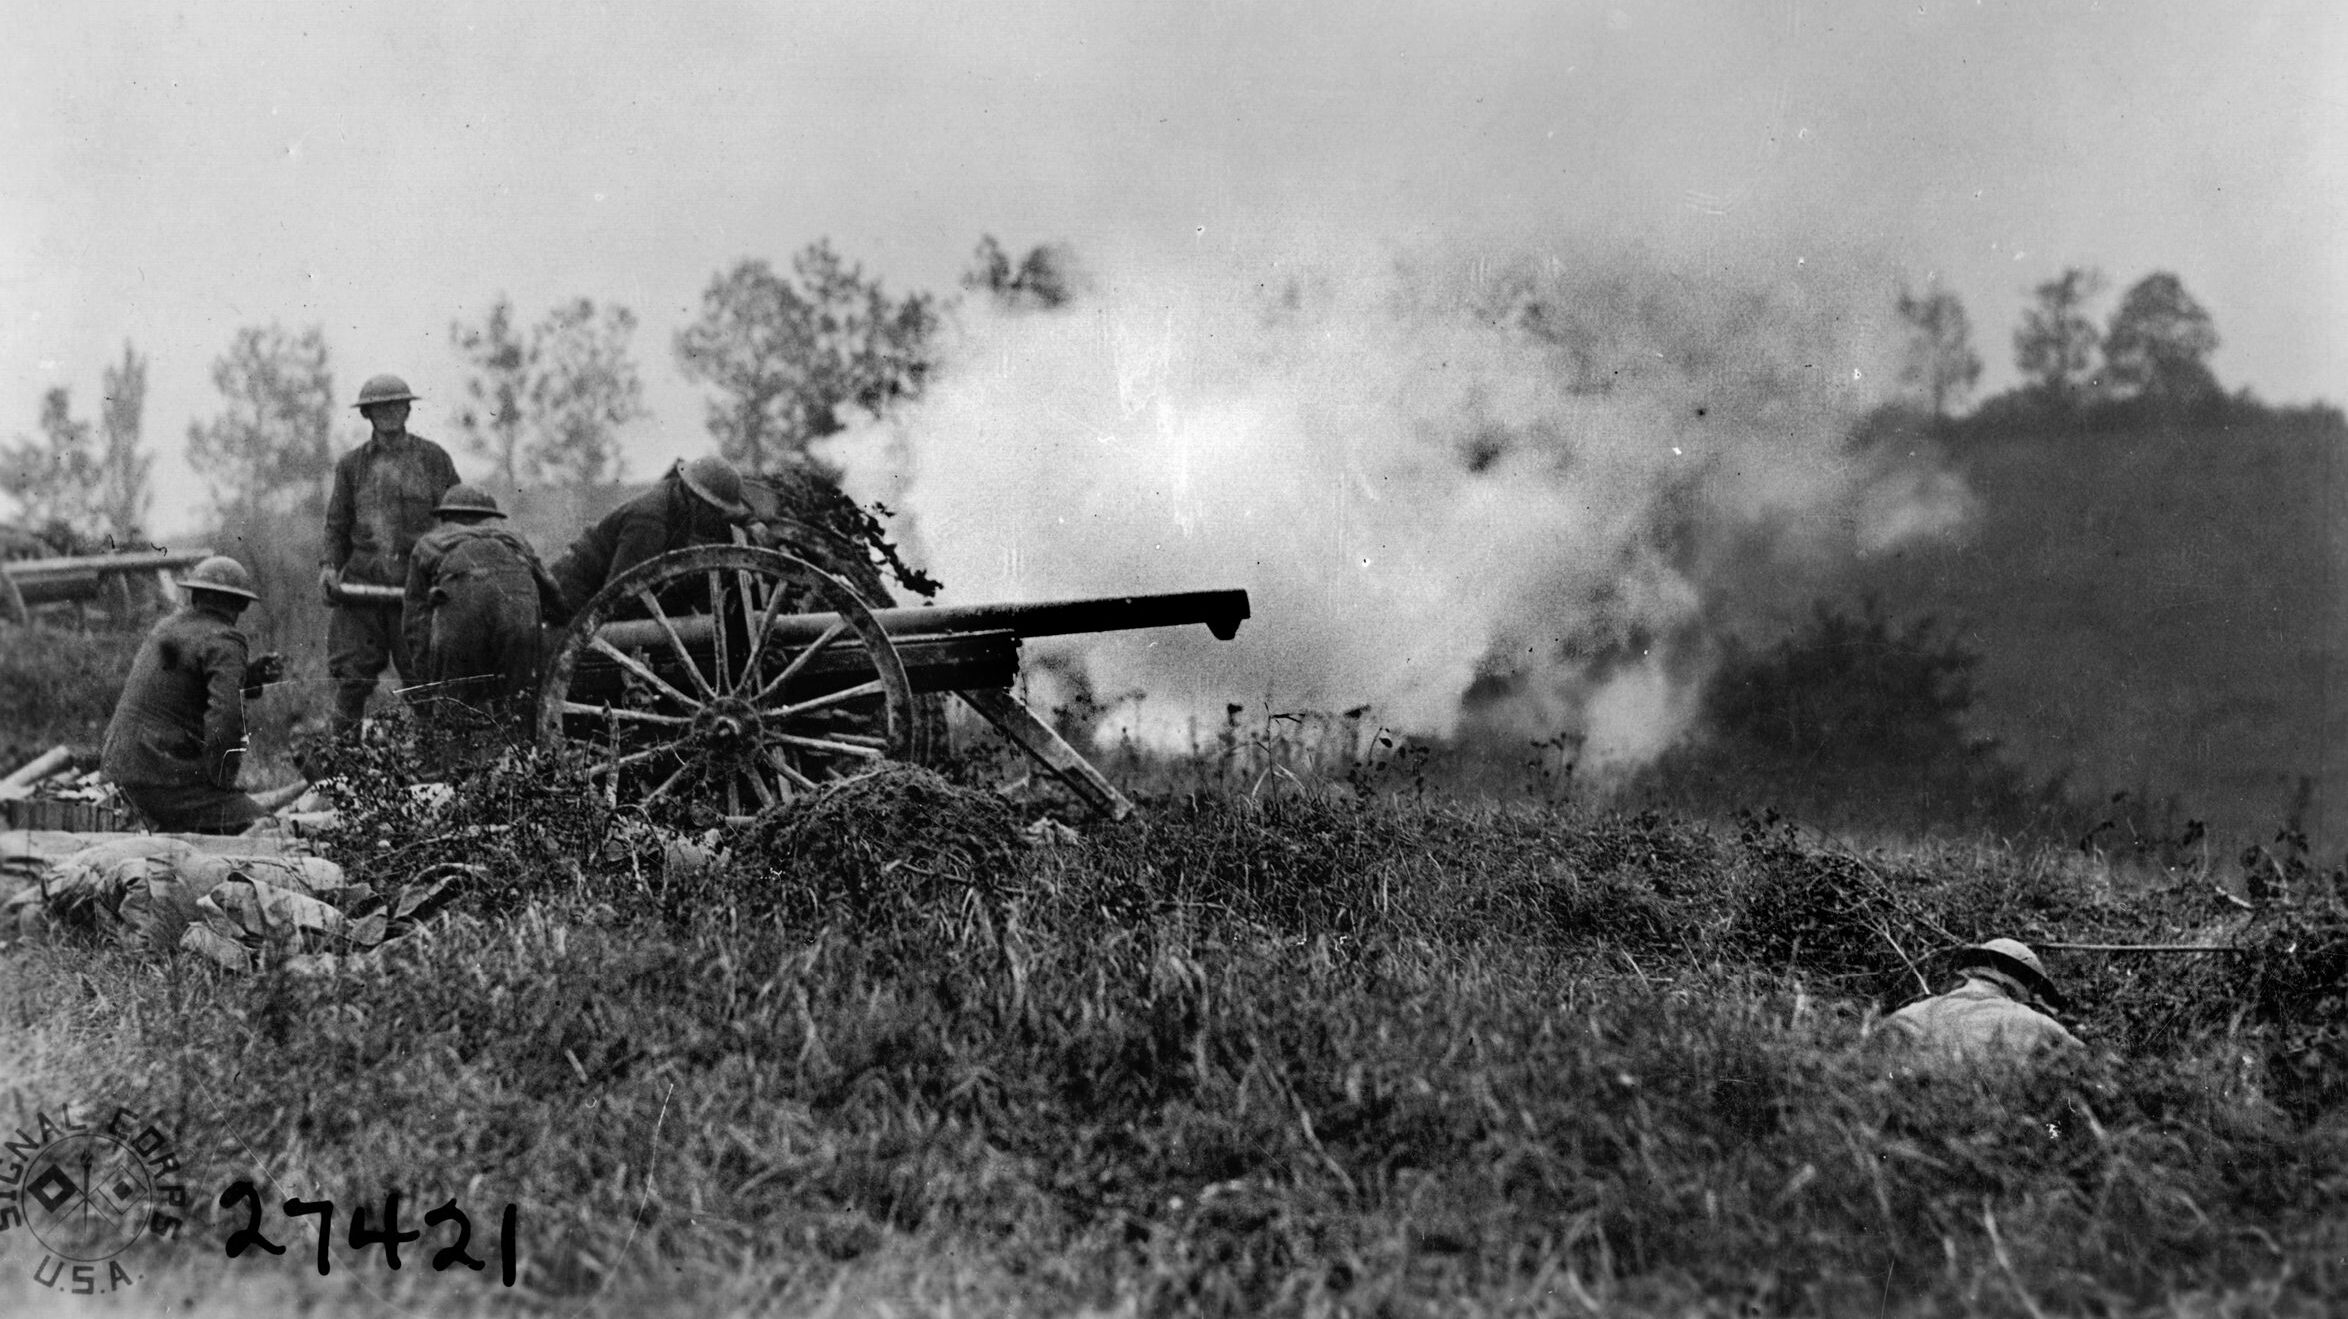 The 6th Field Artillery, attached to the 1st Division, blasts German positions in the Meuse-Argonne during World War I. The division suffered the most casualties of any American unit in the war.